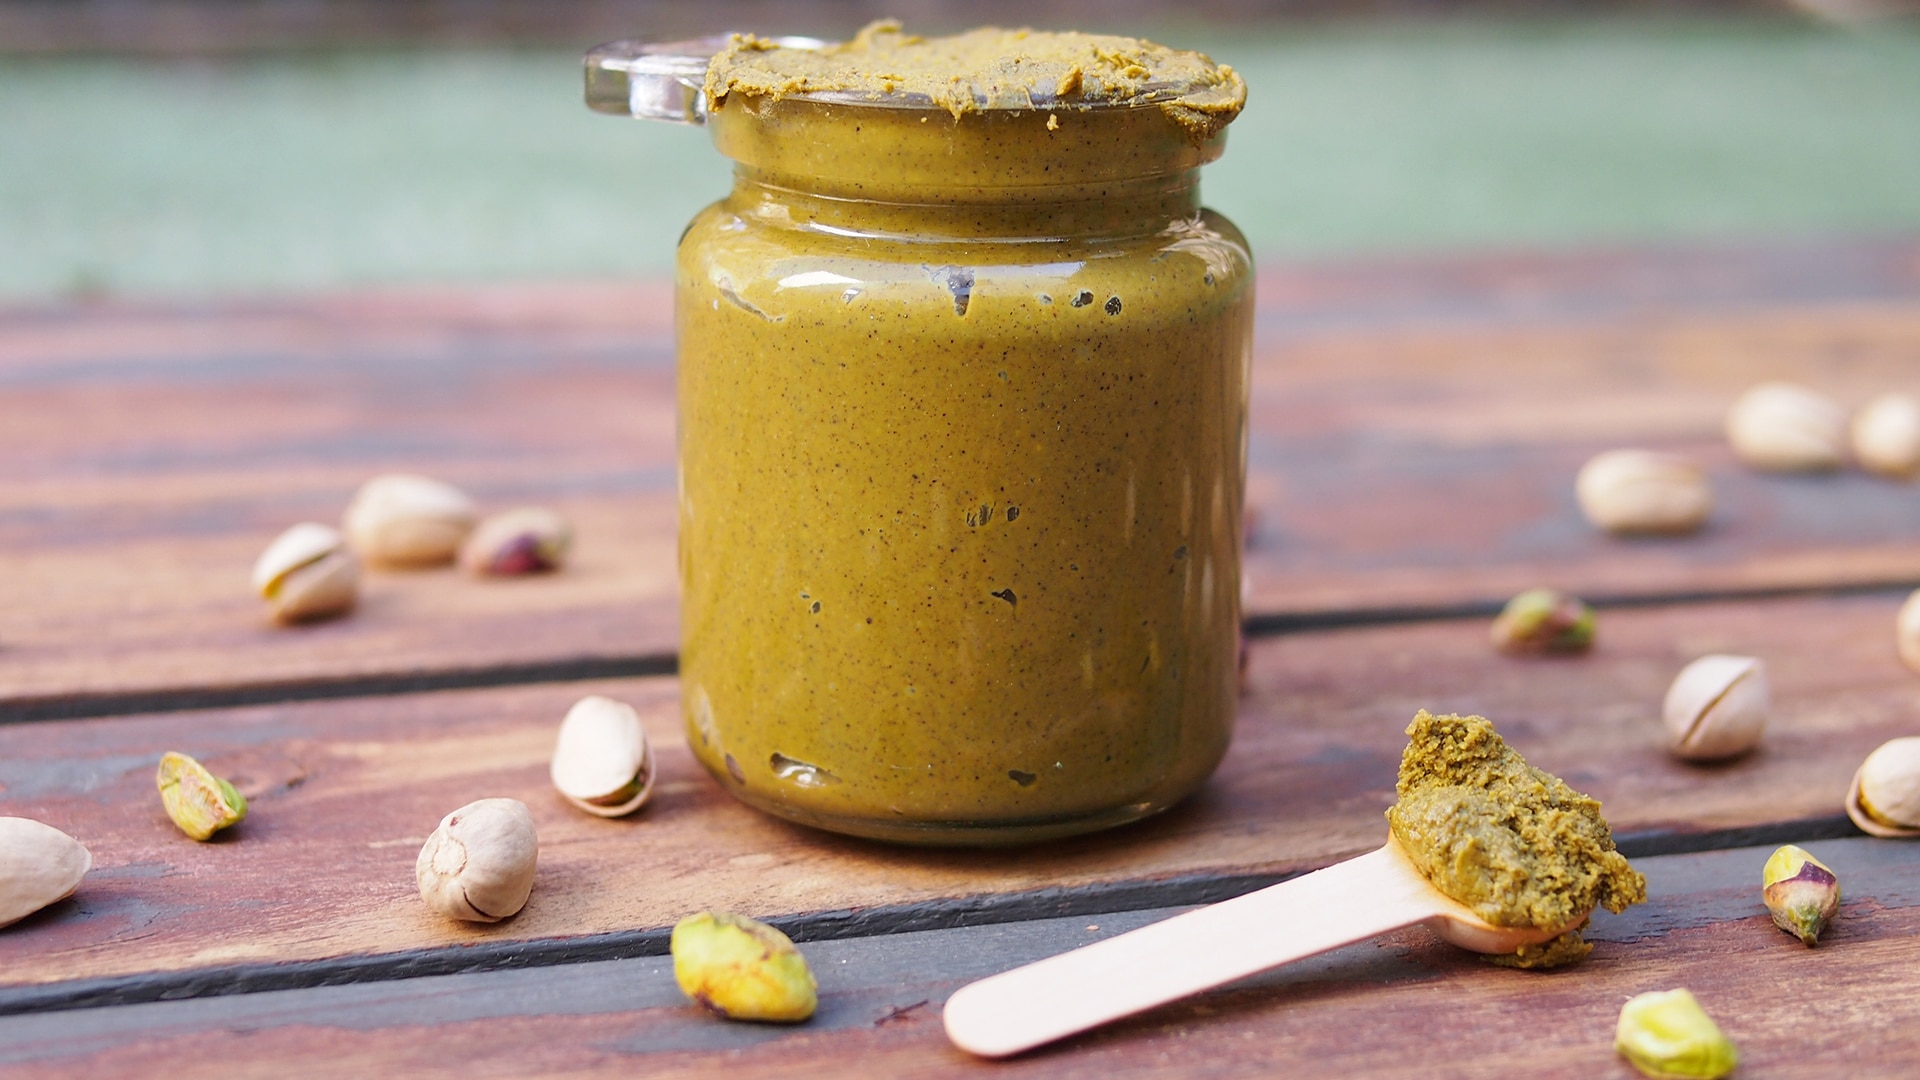 Image of homemade Pistachio Butter in a jar